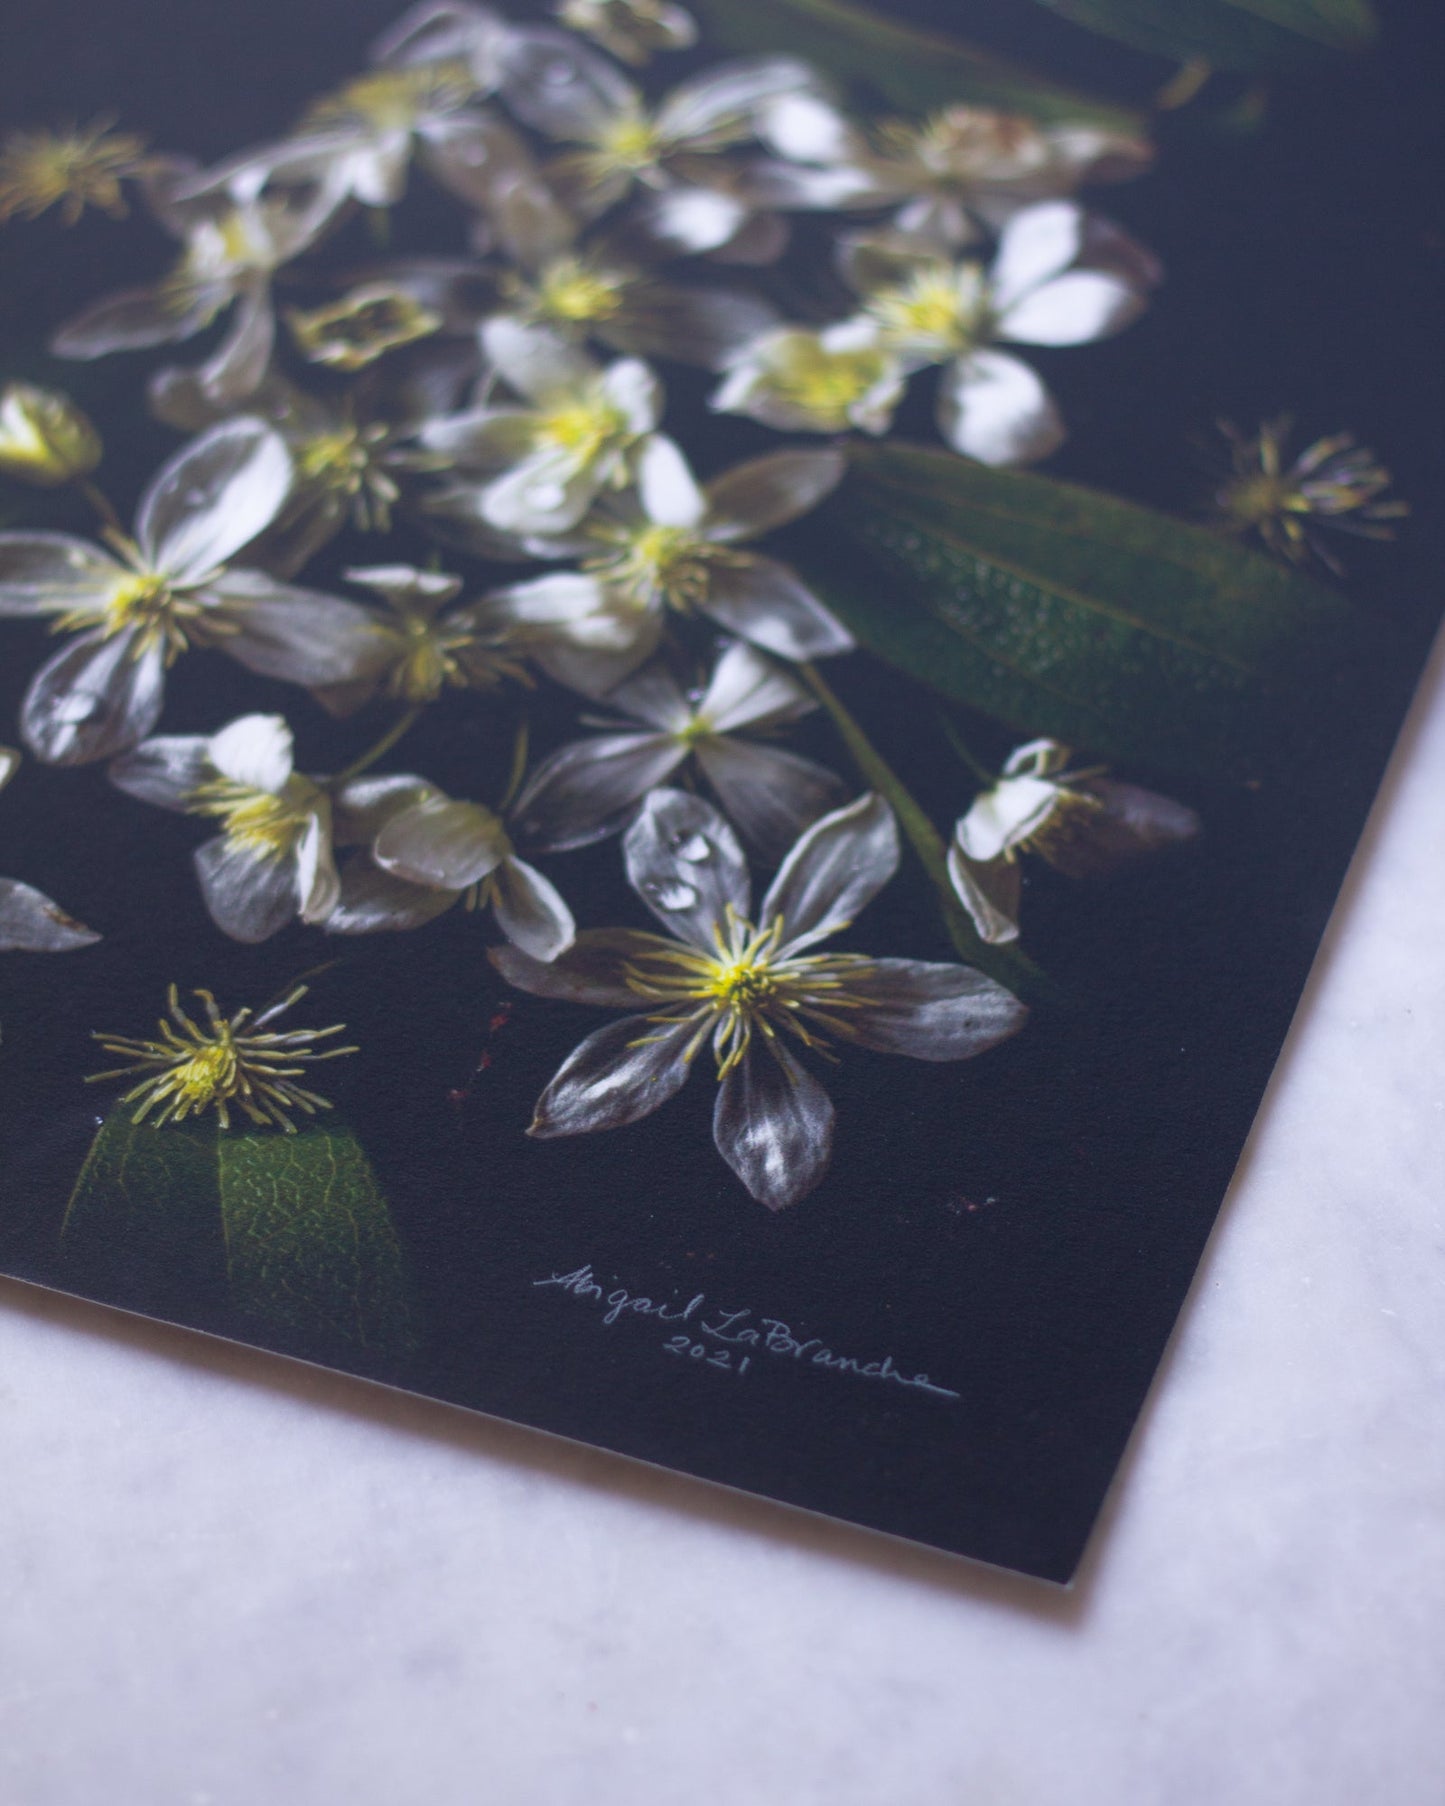 The Sprouted Shallots  - A Month of Tables Series Day 10 - Limited Edition Print